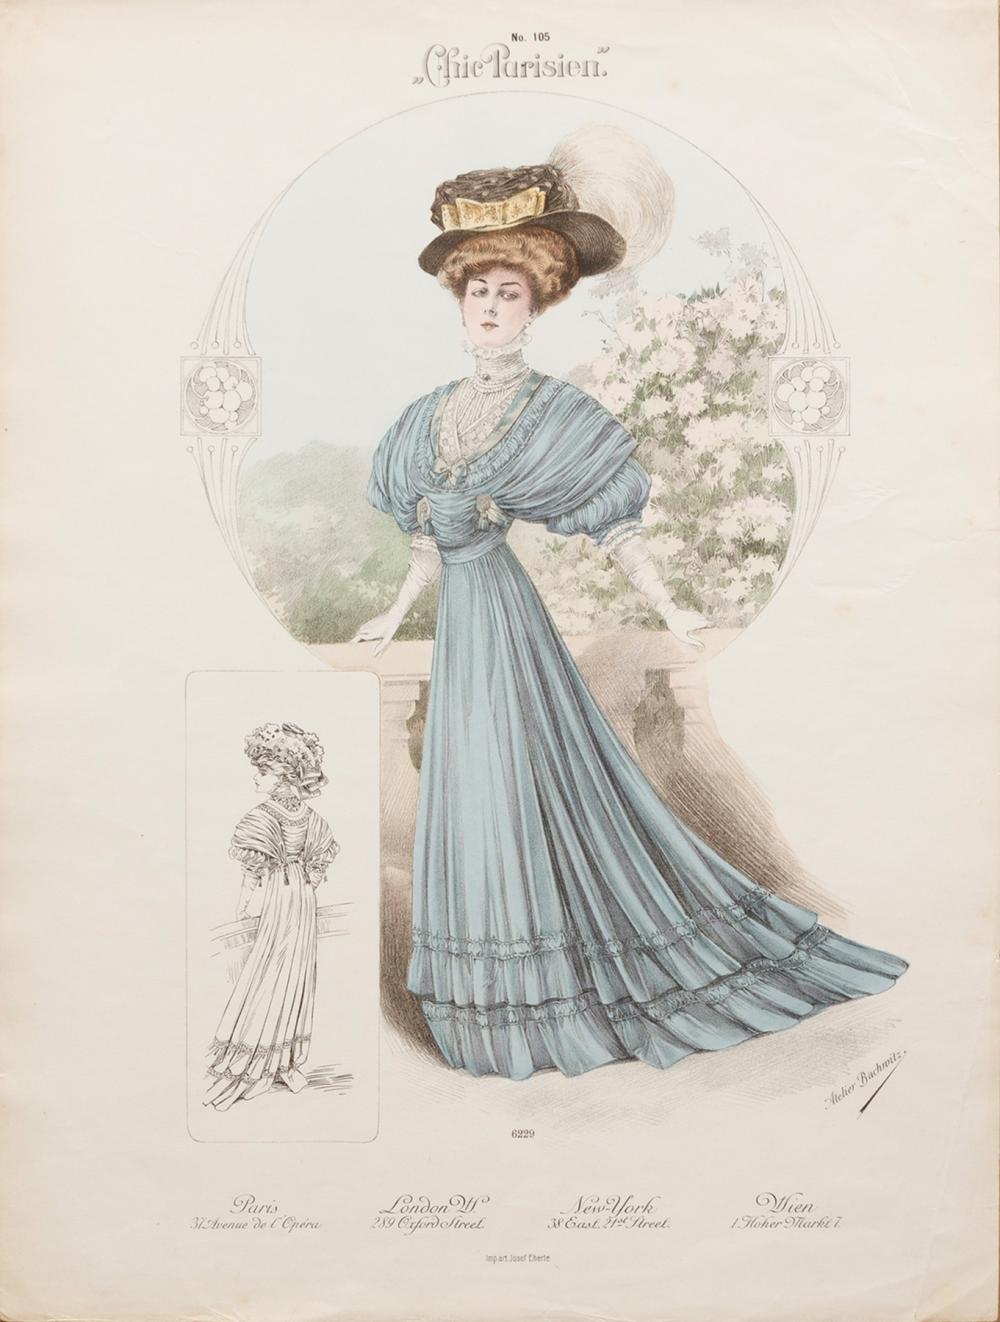 EARLY 20TH CENTURY FASHION PLATE LITHOGRAPHSGroup